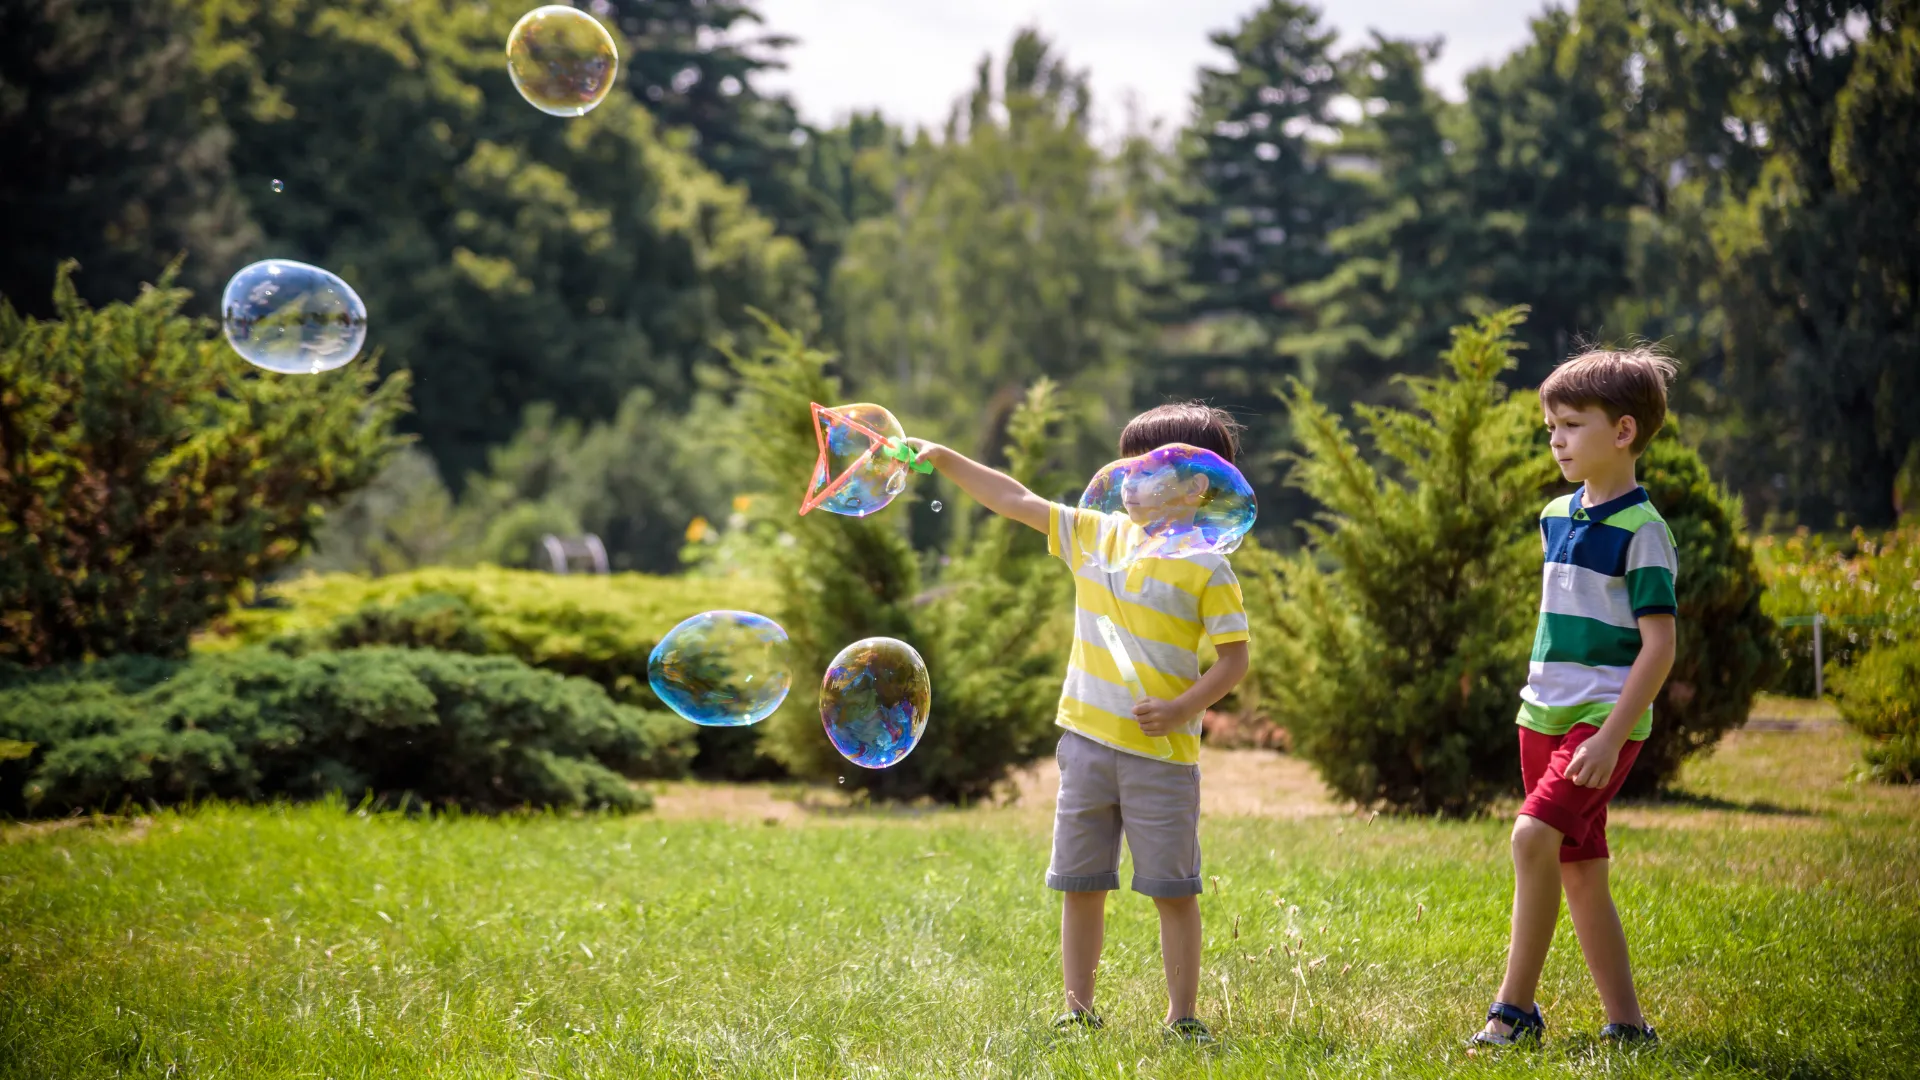 Two kids playing with bubbles in their backyard.